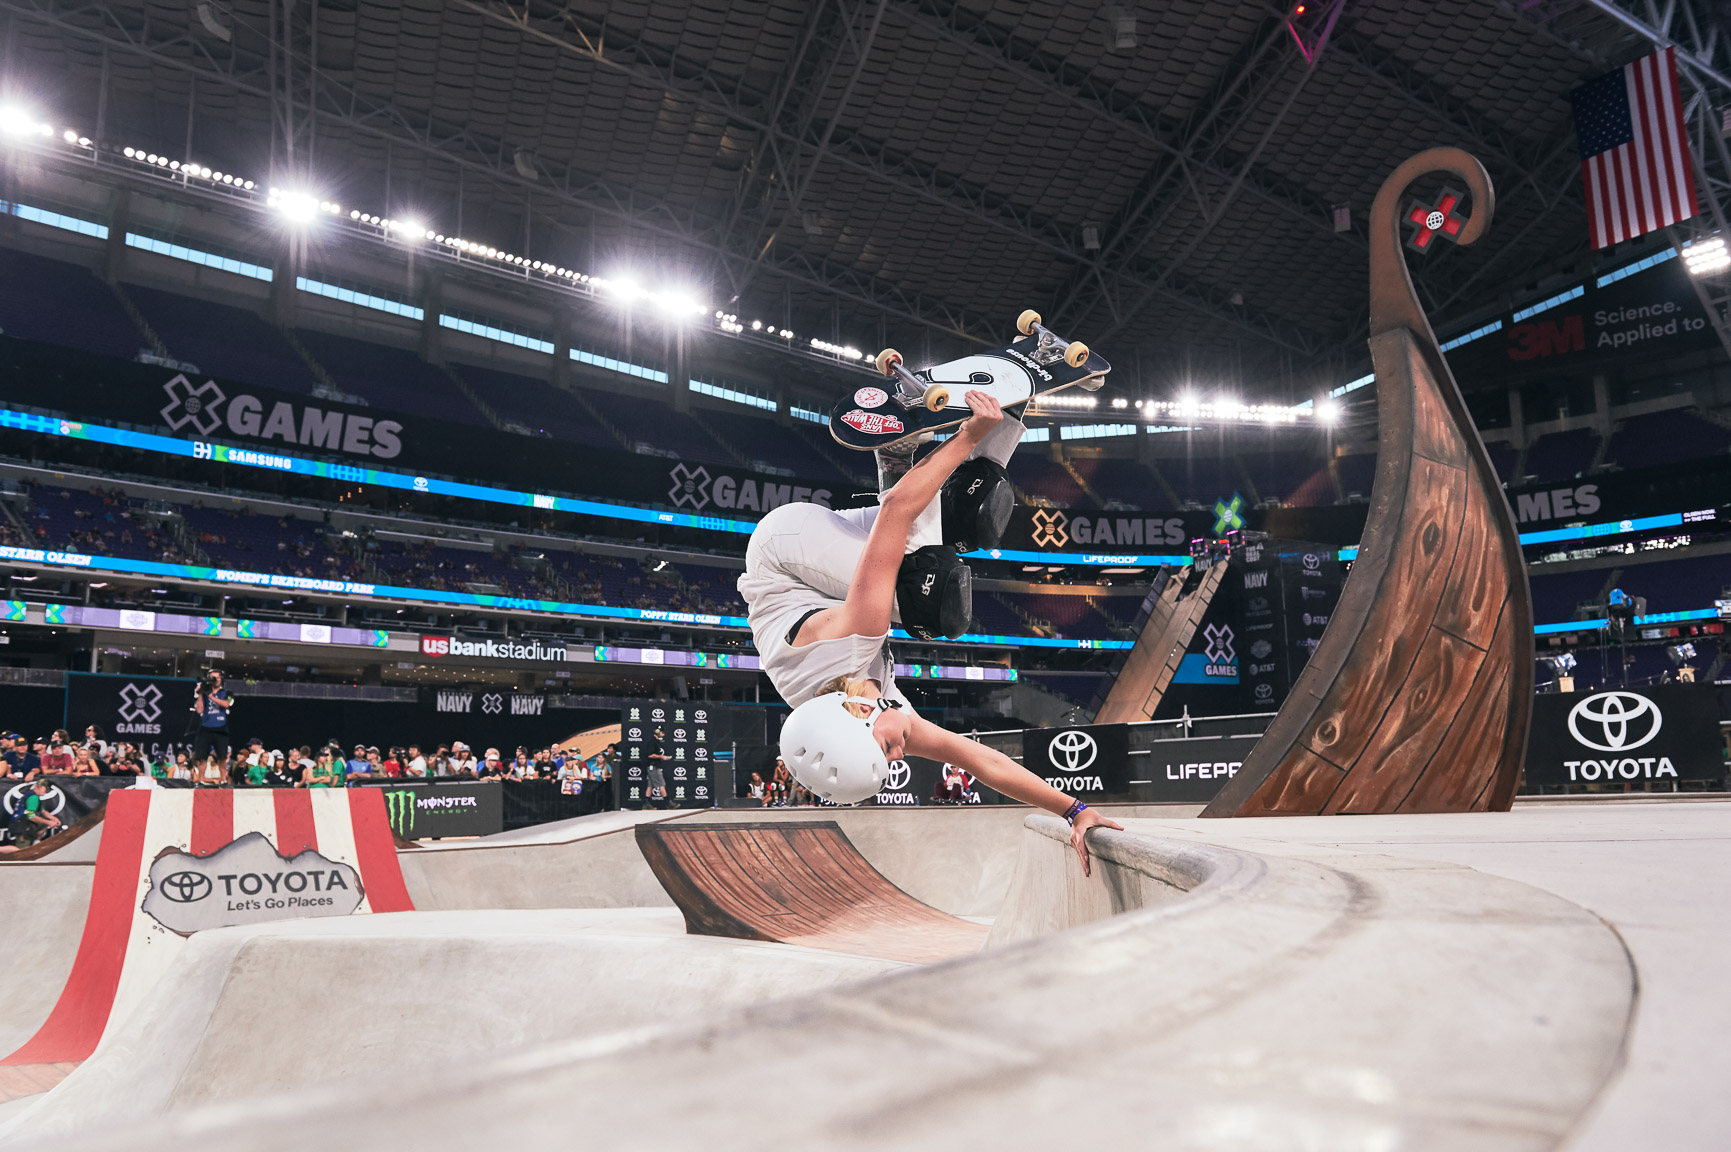 This was not Poppy Starr Olsen's first X Games. She competed in Women's Skateboard Park at XG Austin 2016 but admitted she was a bit too starstruck to skate to her full potential. The Australian, who has a one-footed Andrecht handplant in her bag of tricks, reined in her nerves on Saturday and skated her way to an X Games bronze medal.